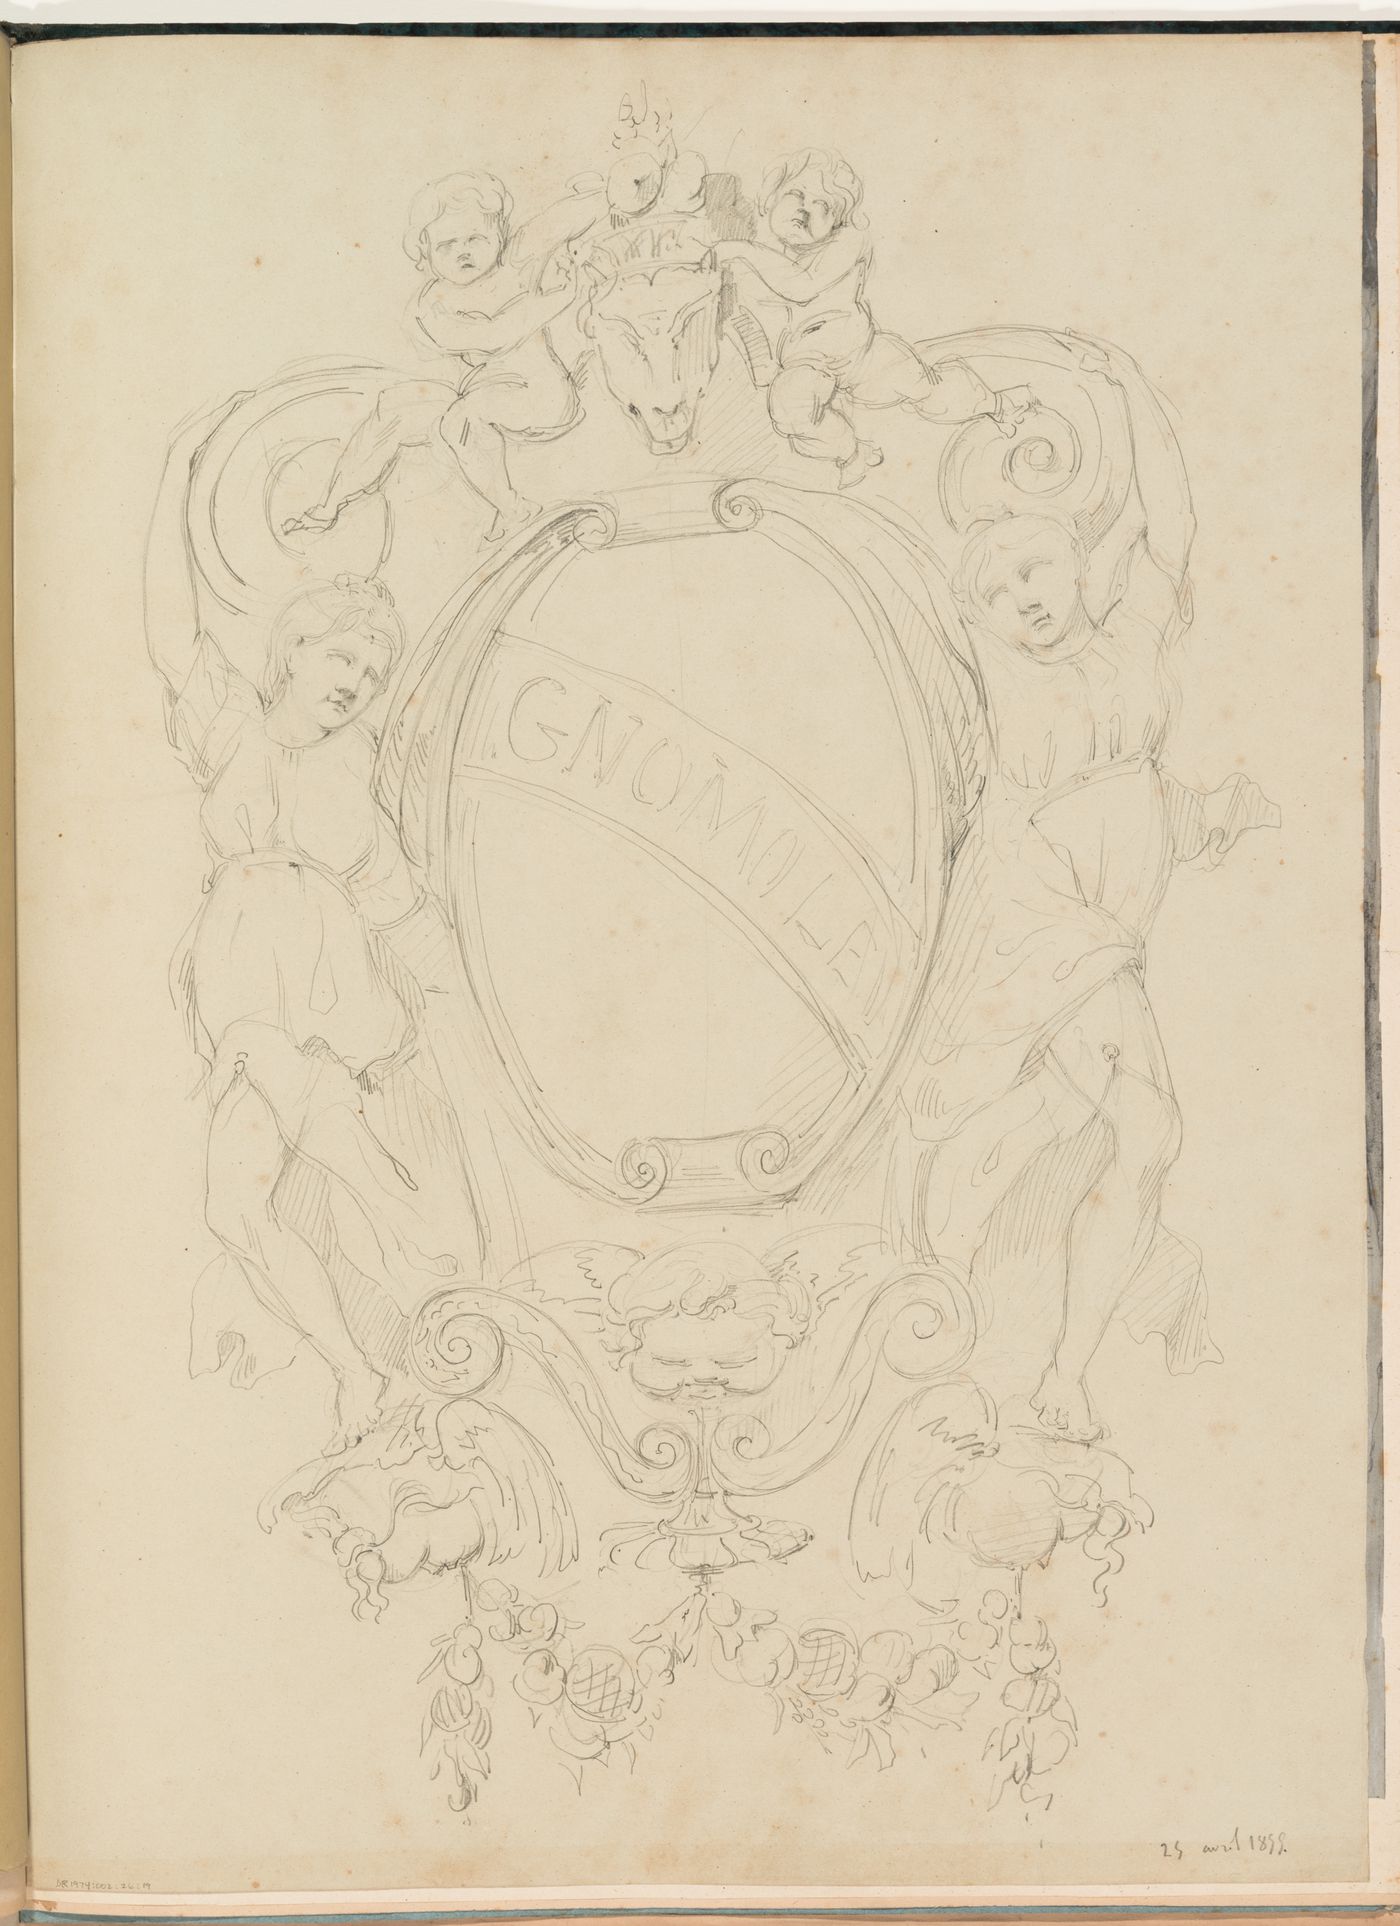 Elevation of a cartouche